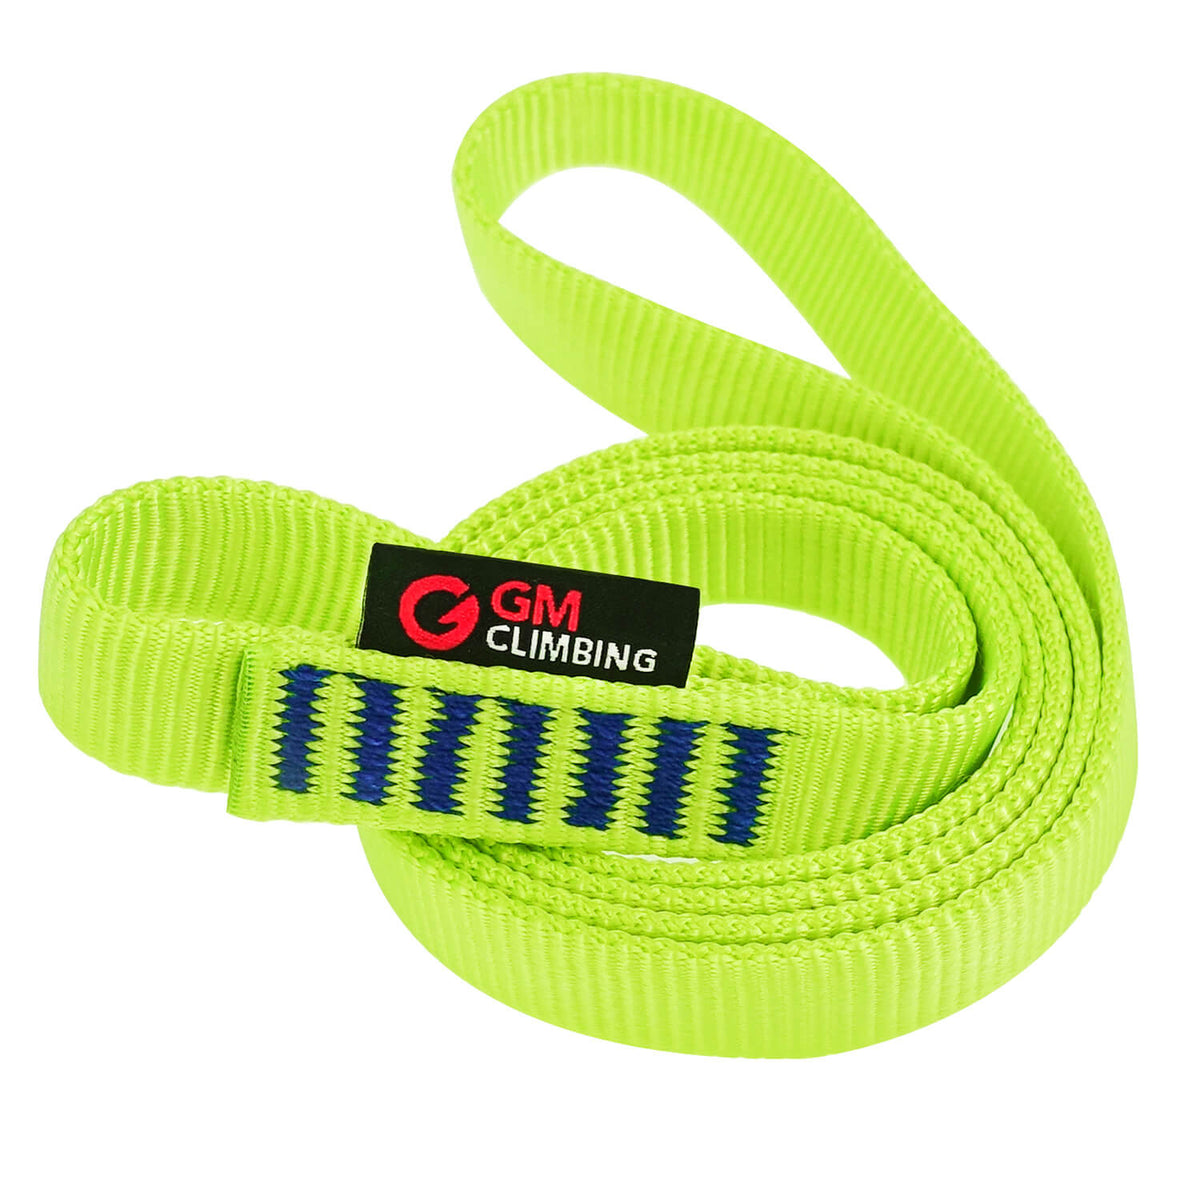  CAMNAL Climbing Sling UIAA CE Certified 16mm Nylon Sling  22KN(4840 lb) Climbing Sling 24-87in (60-220cm), Blue/Yellow/Purple, 1/2/3  Pack (32 in/80 cm 2 Pack, Blue) : Sports & Outdoors